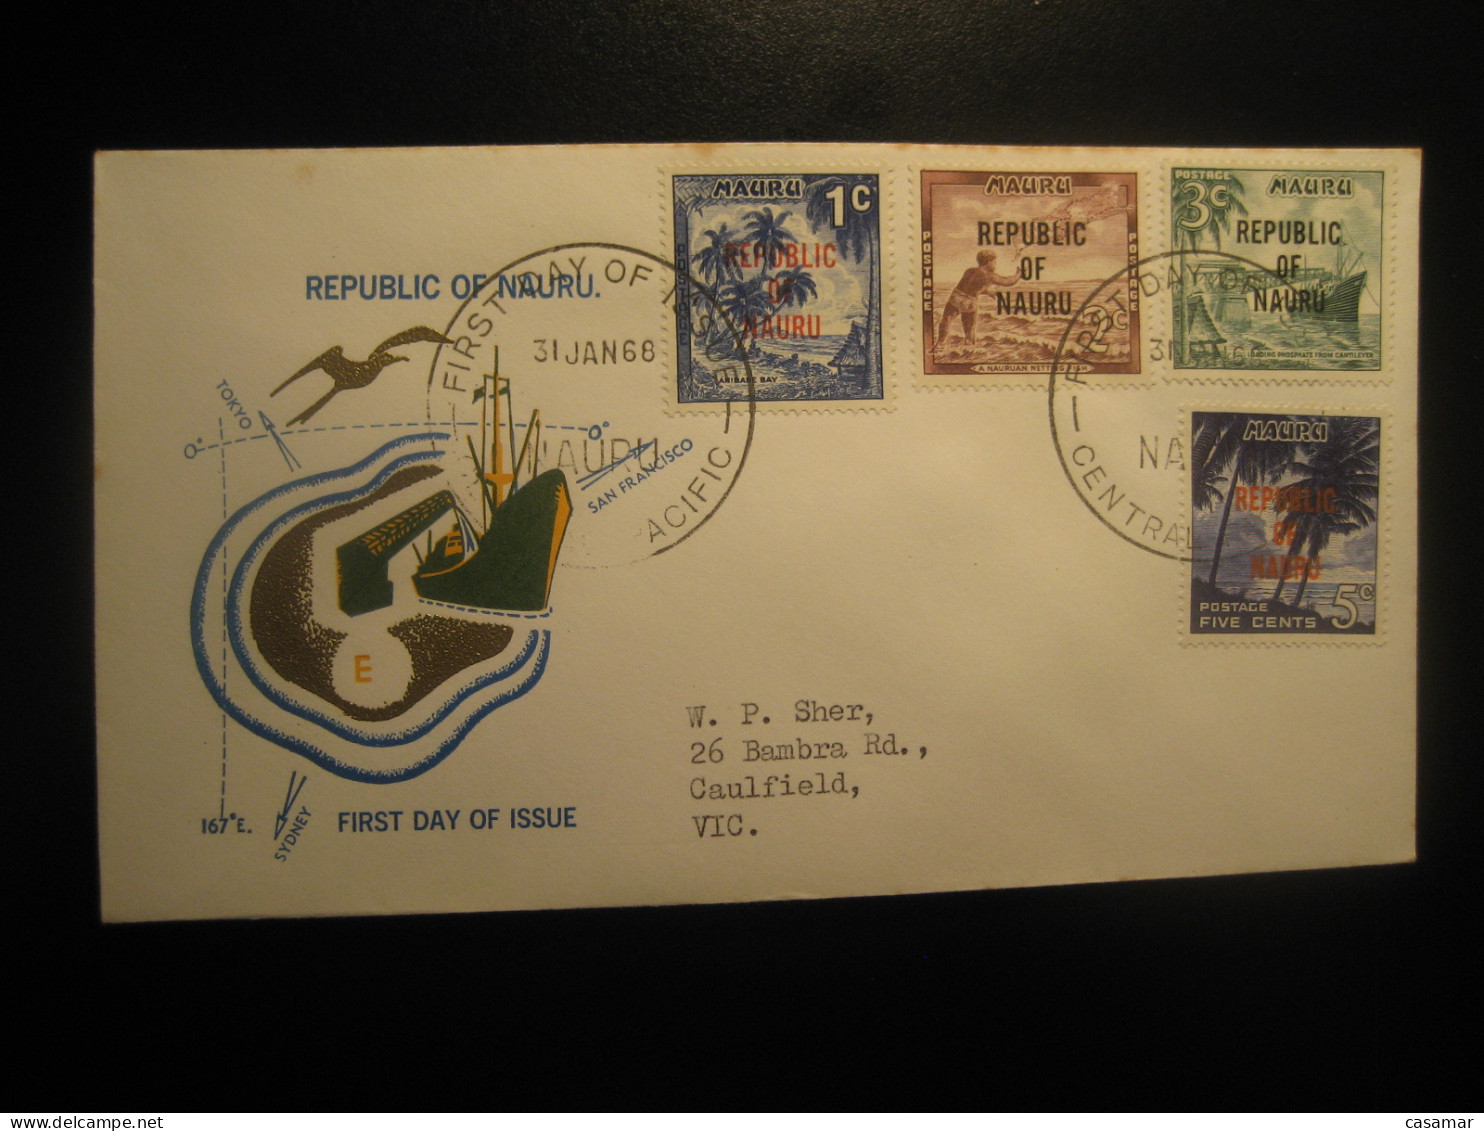 CENTRAL PACIFIC 1968 To Caulfield Australia Phosphate Geology Mineral Minerals FDC Cancel Cover NAURU - Mineralien